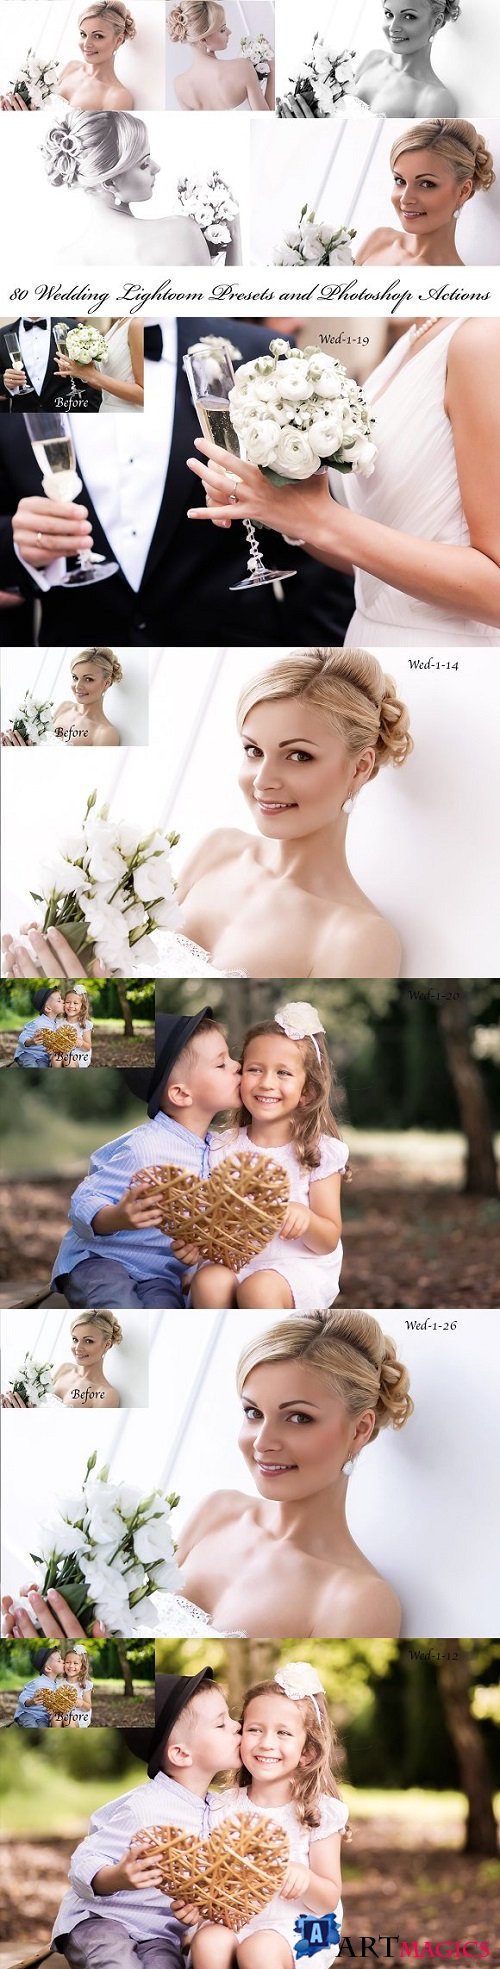 80 Wedding Presets and Actions 1984713